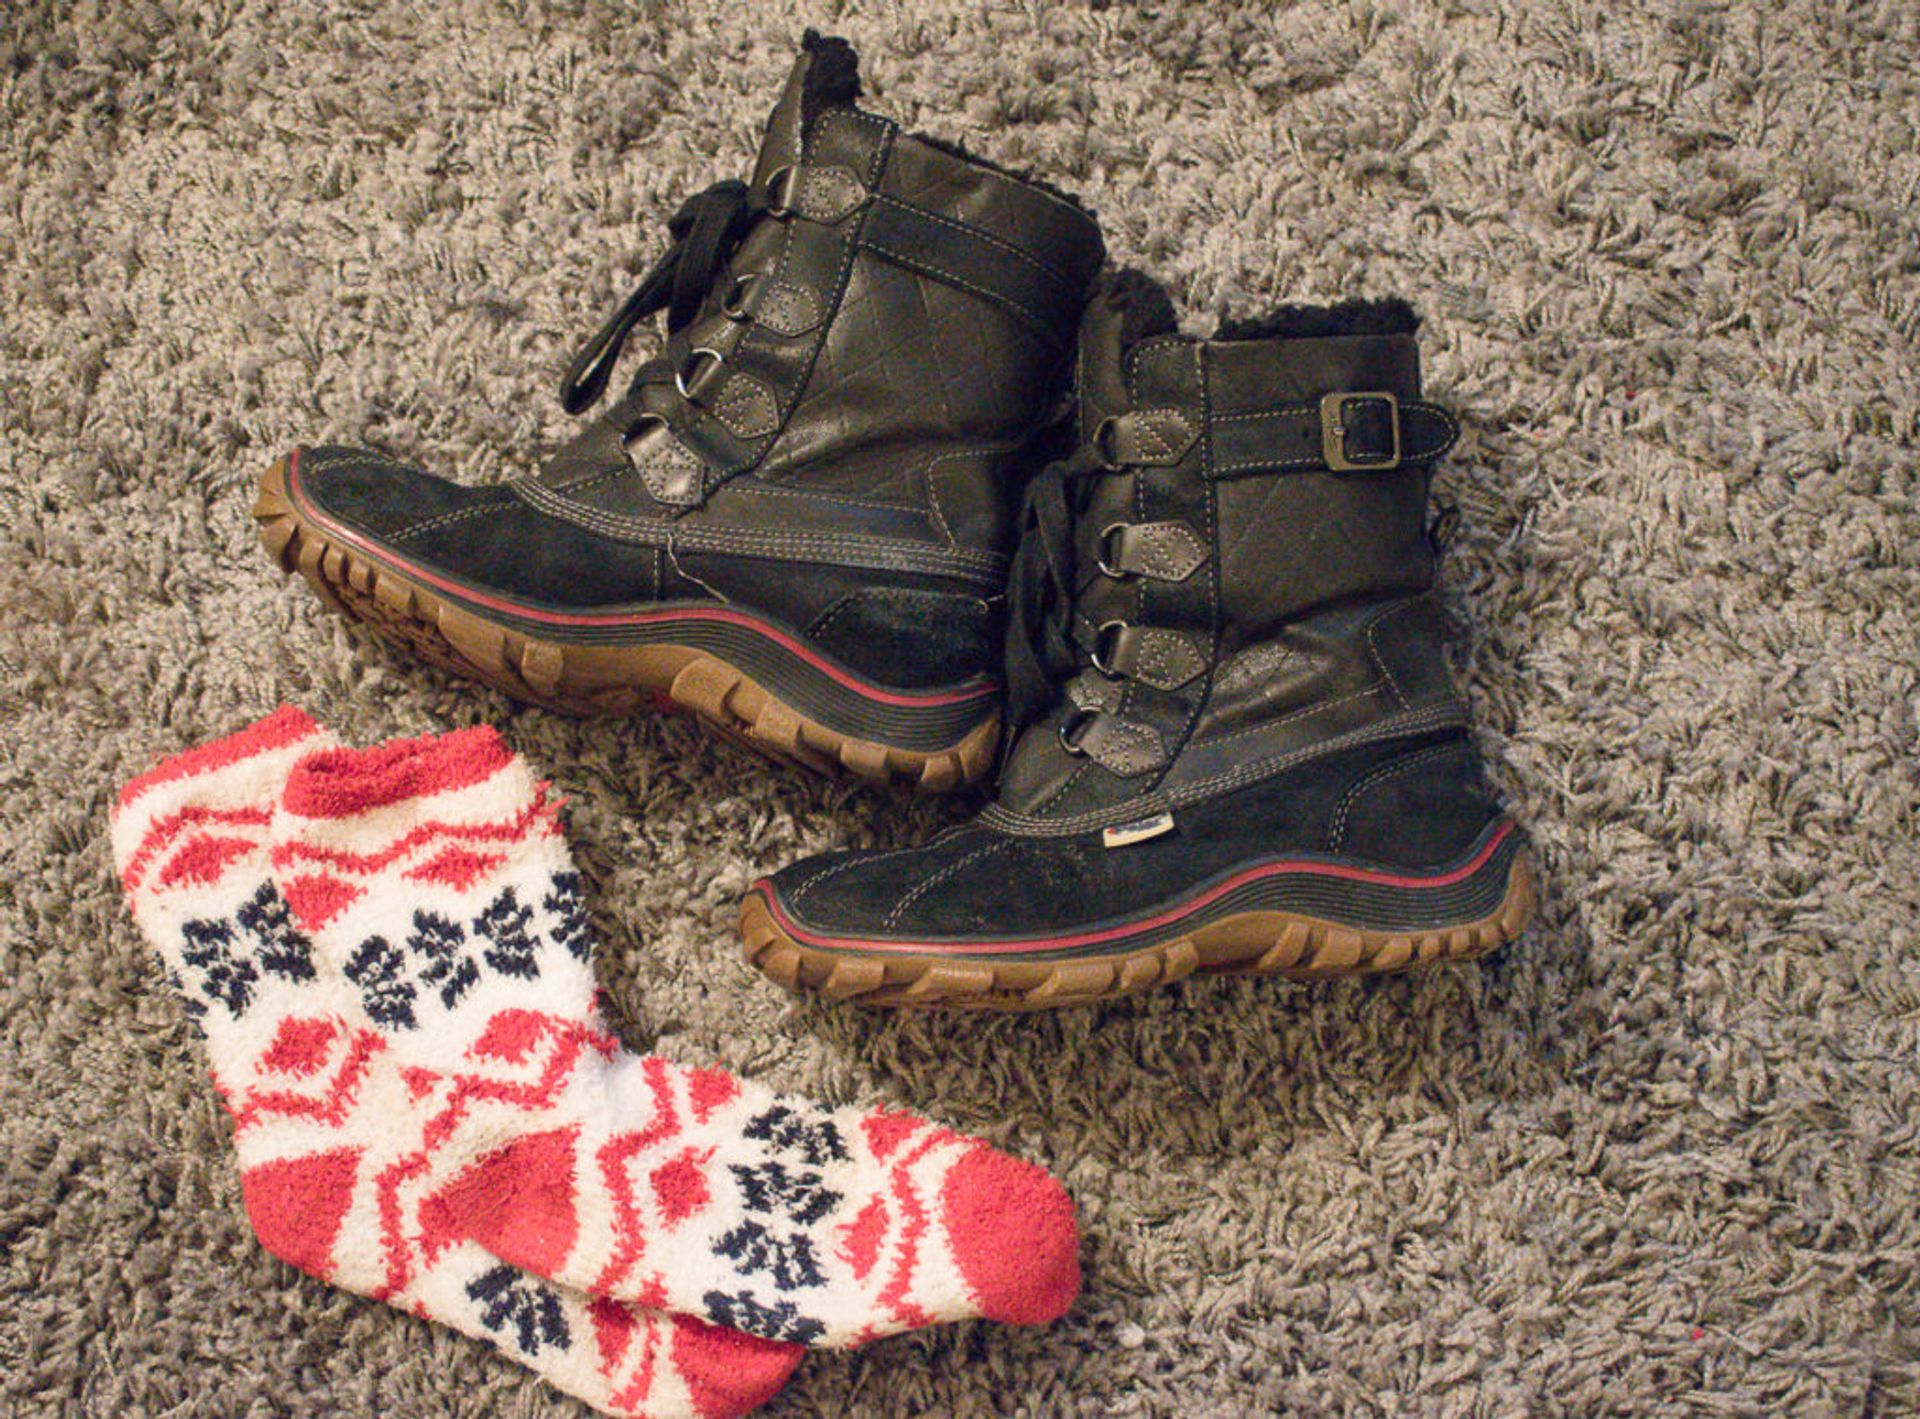 A pair of winter boots and thick socks.